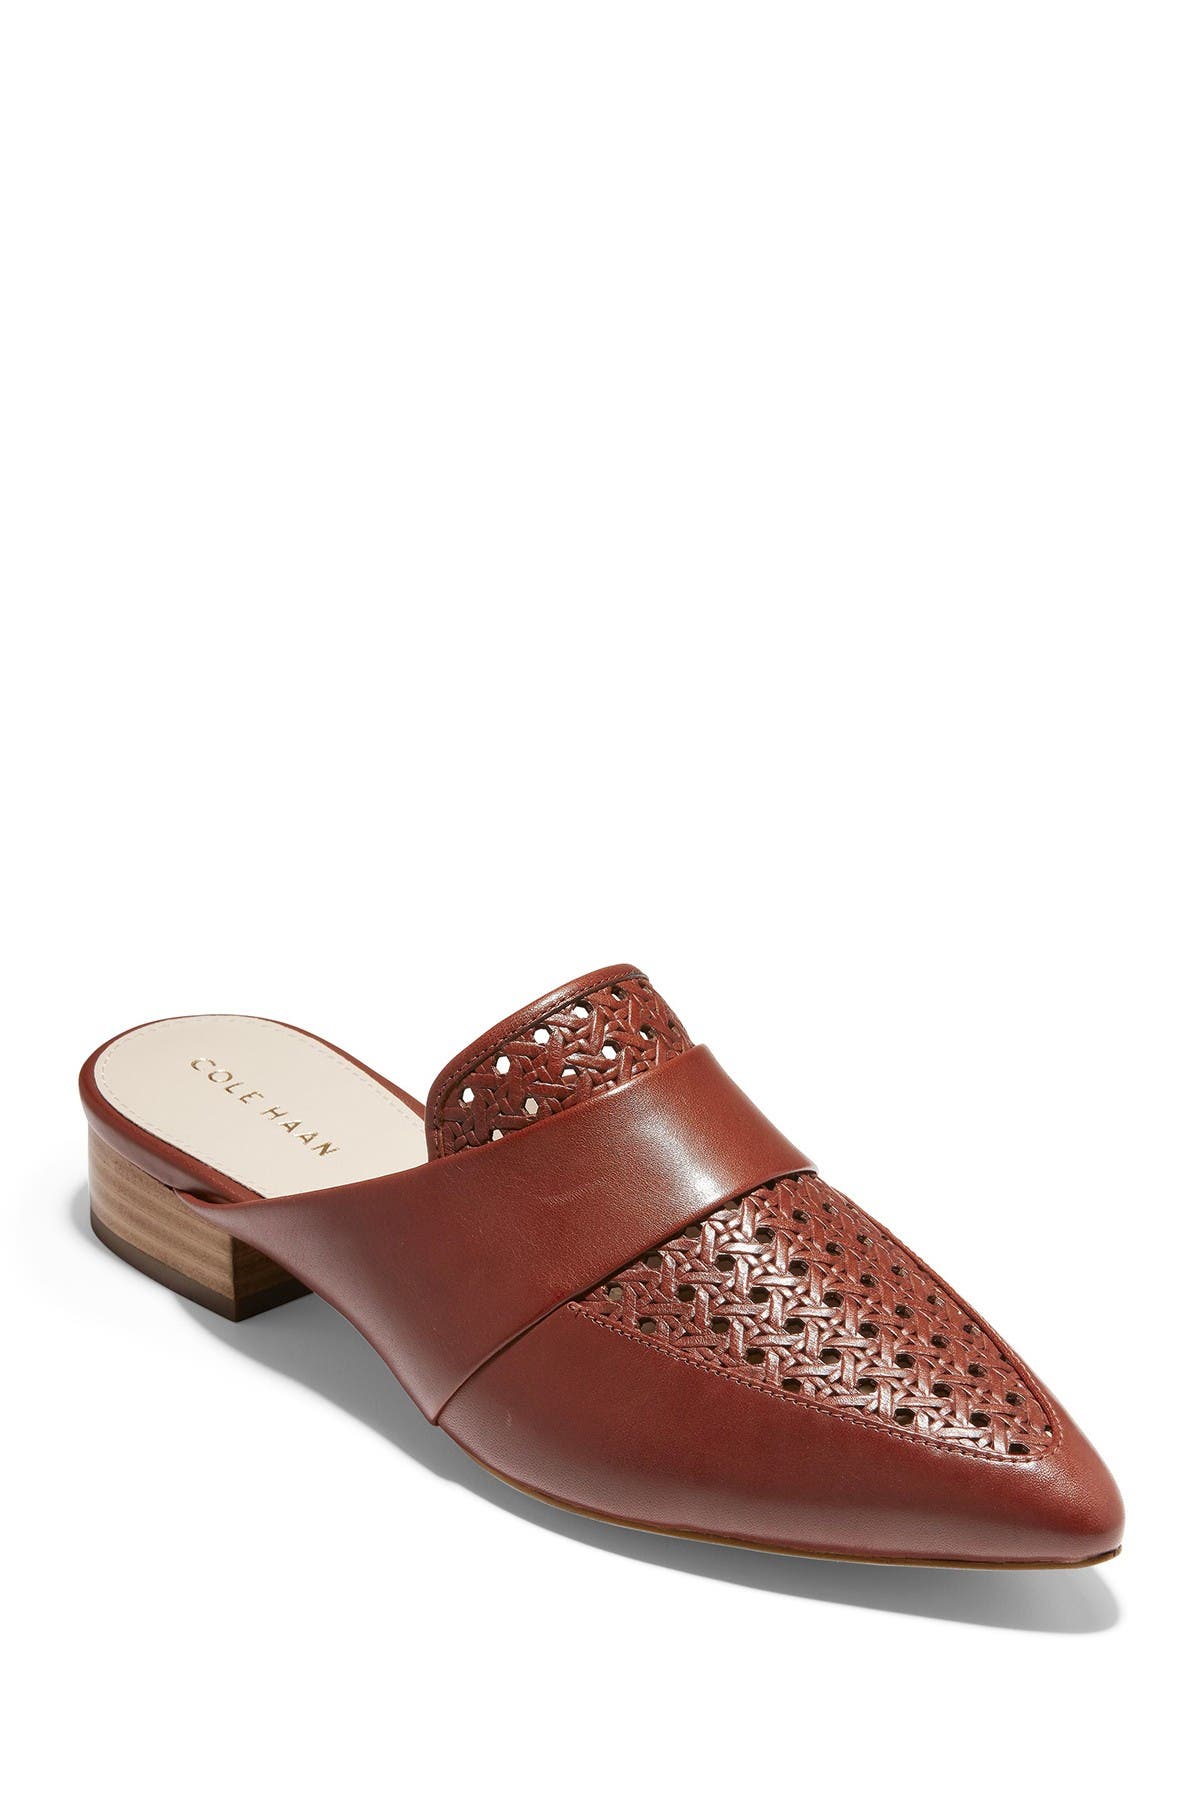 Women's Mules Clearance | Nordstrom Rack